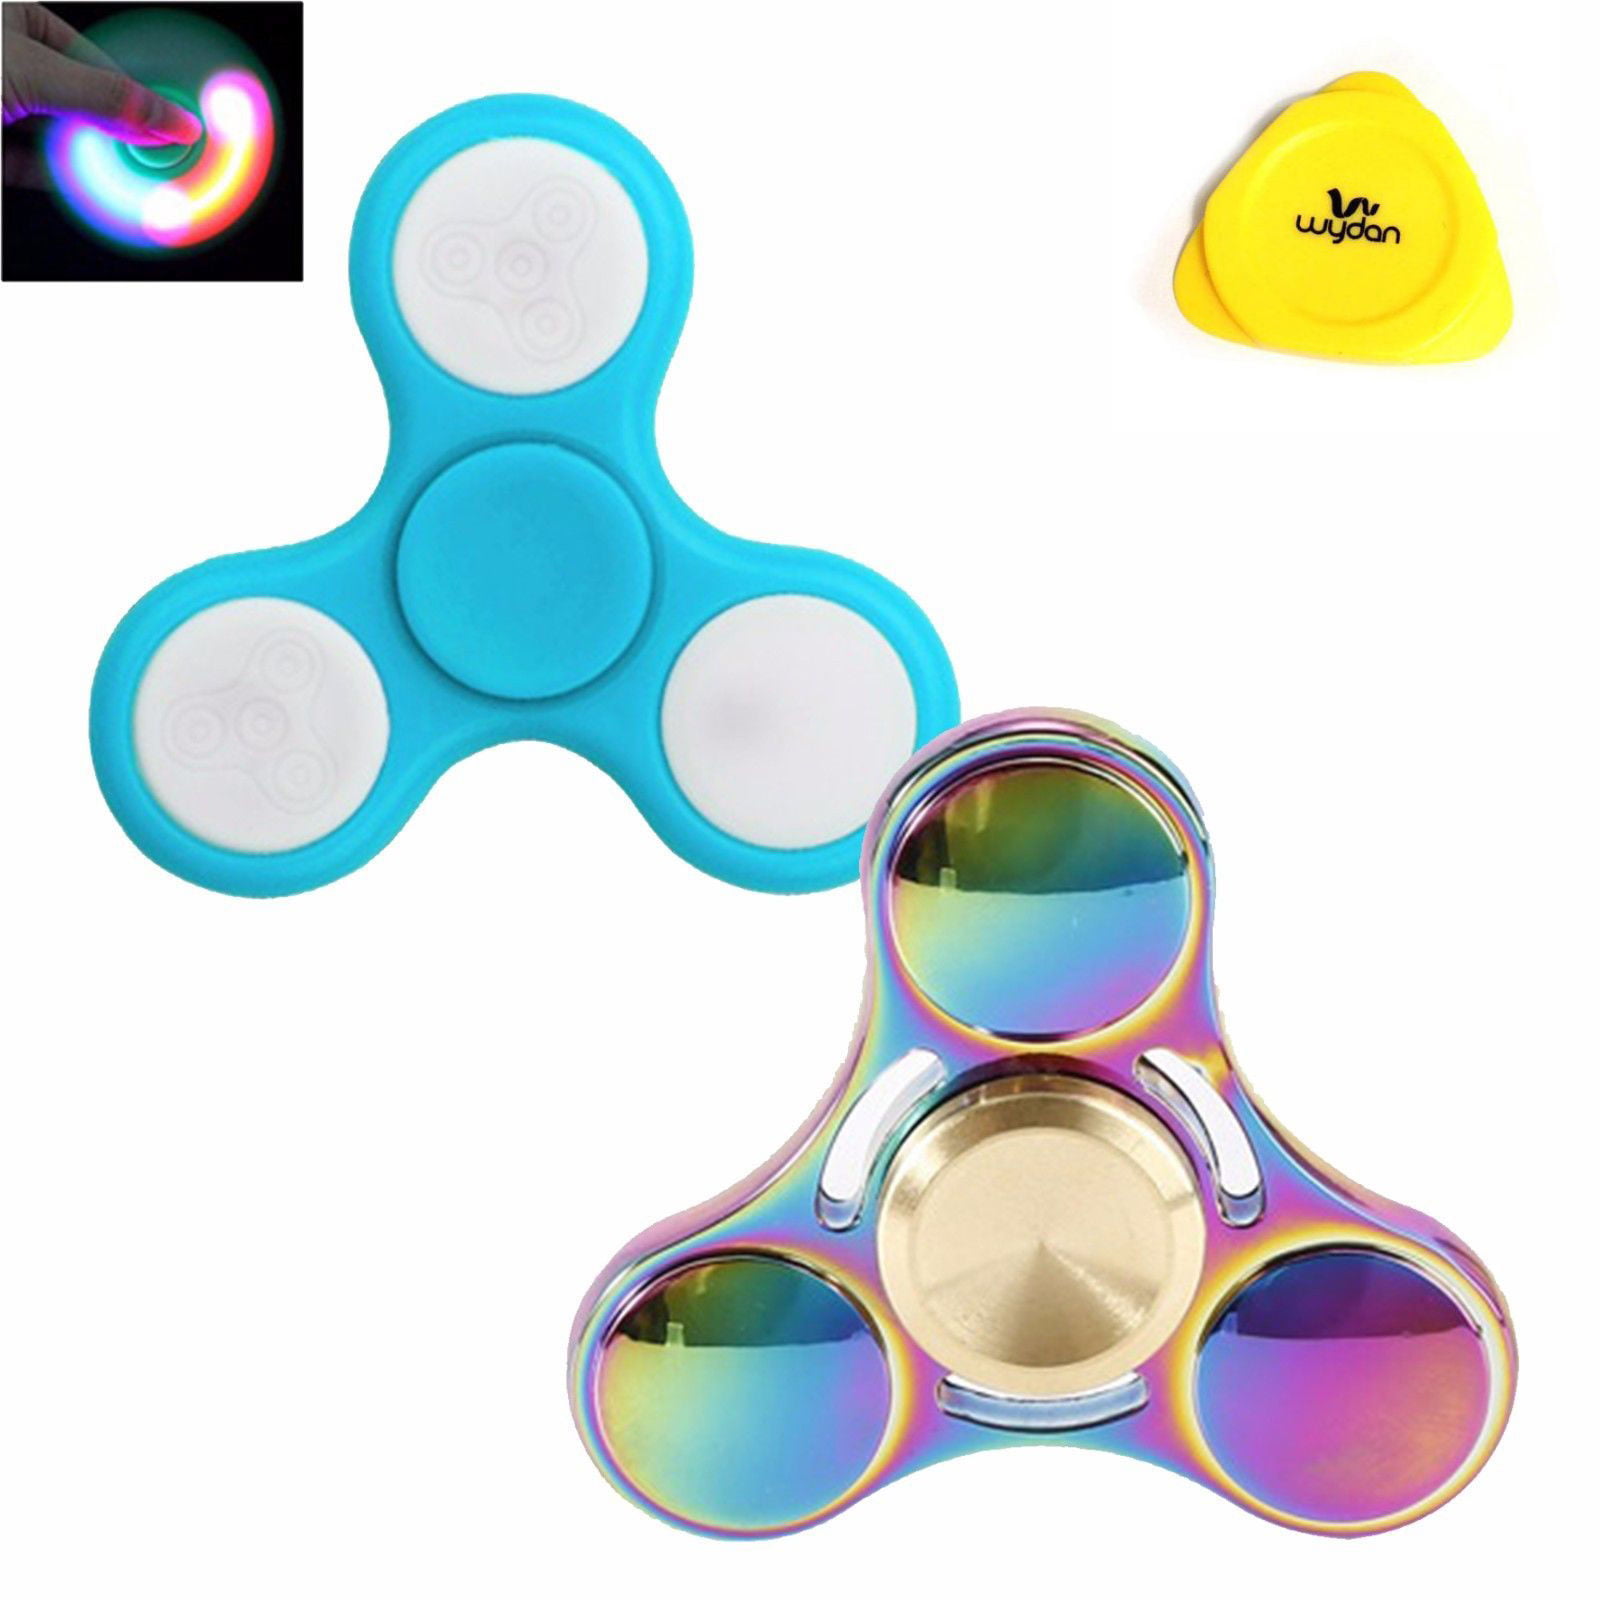 Details about   Gamer Fidget Spinner All Metal Toy Kids Adults Boys Girls Focus Stress ADHD EDC 